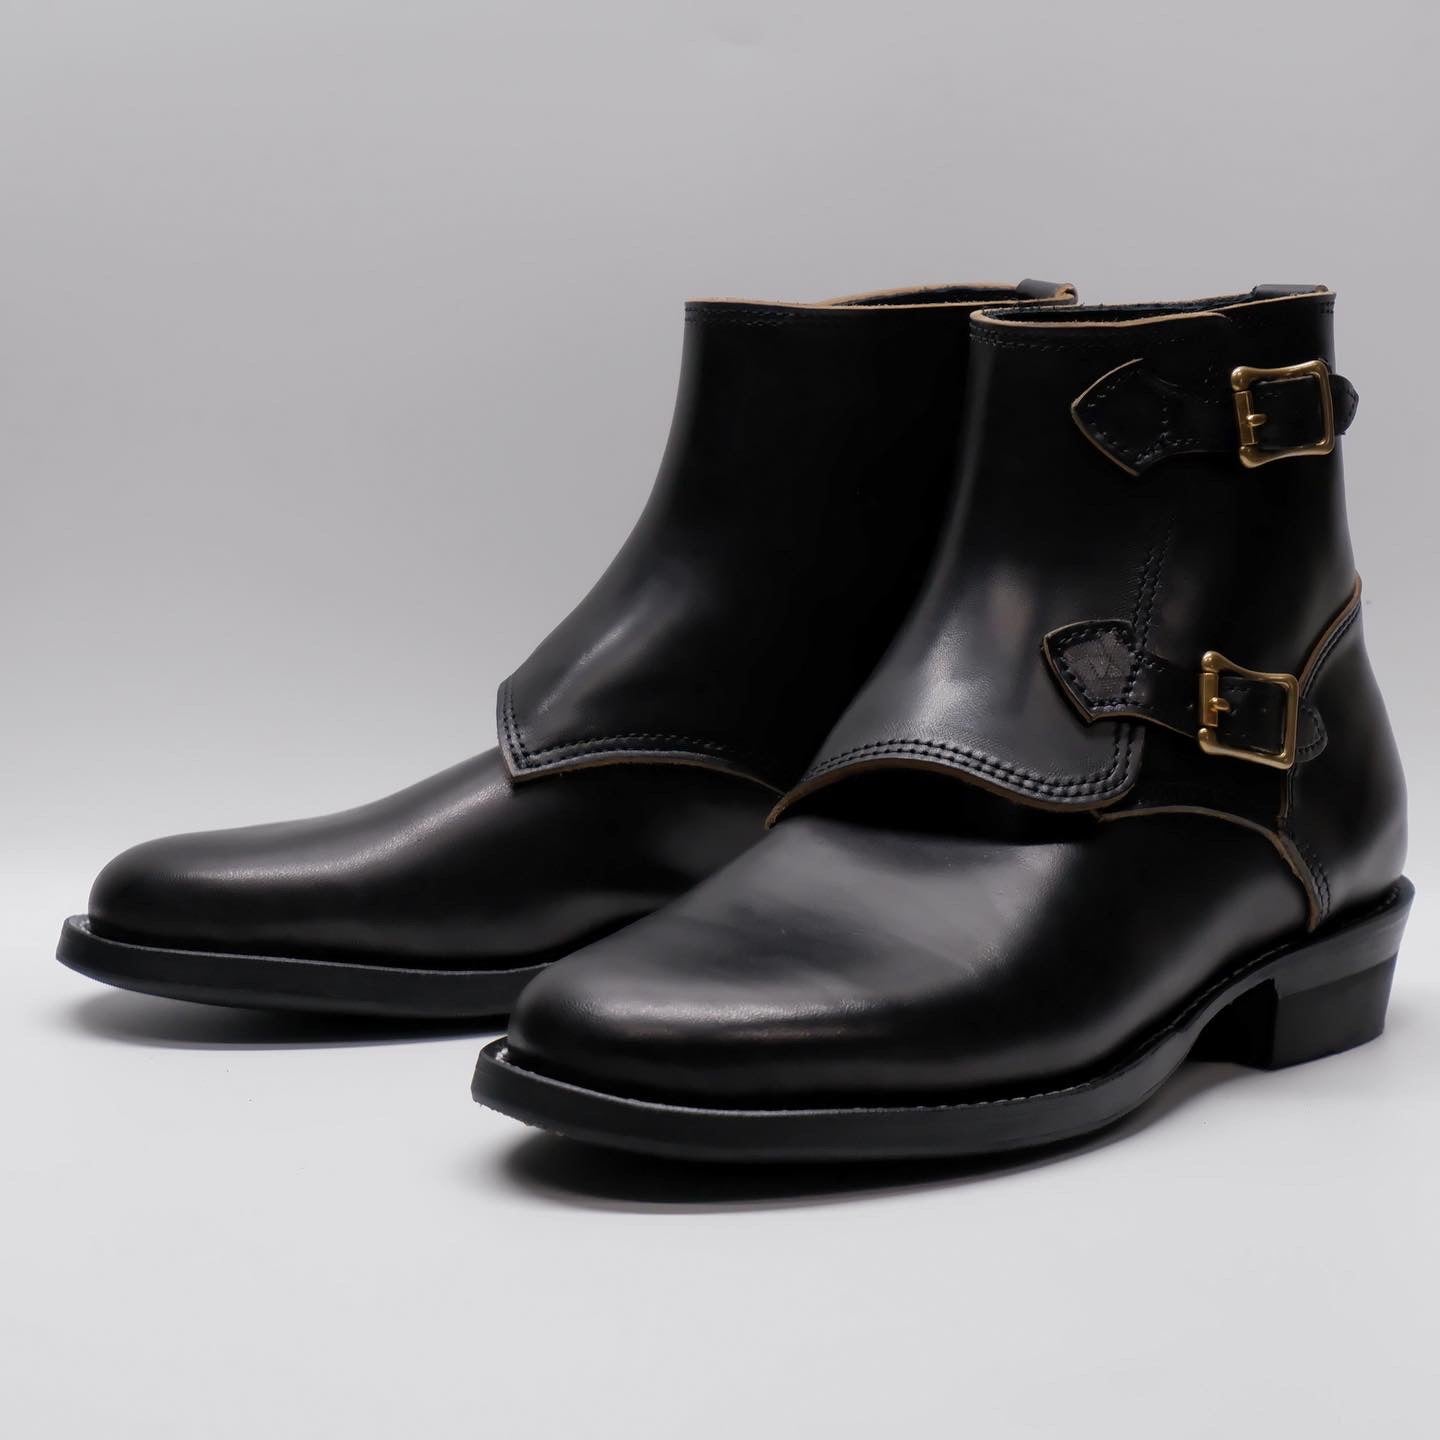 Double Monk Boots “GYPSYS”